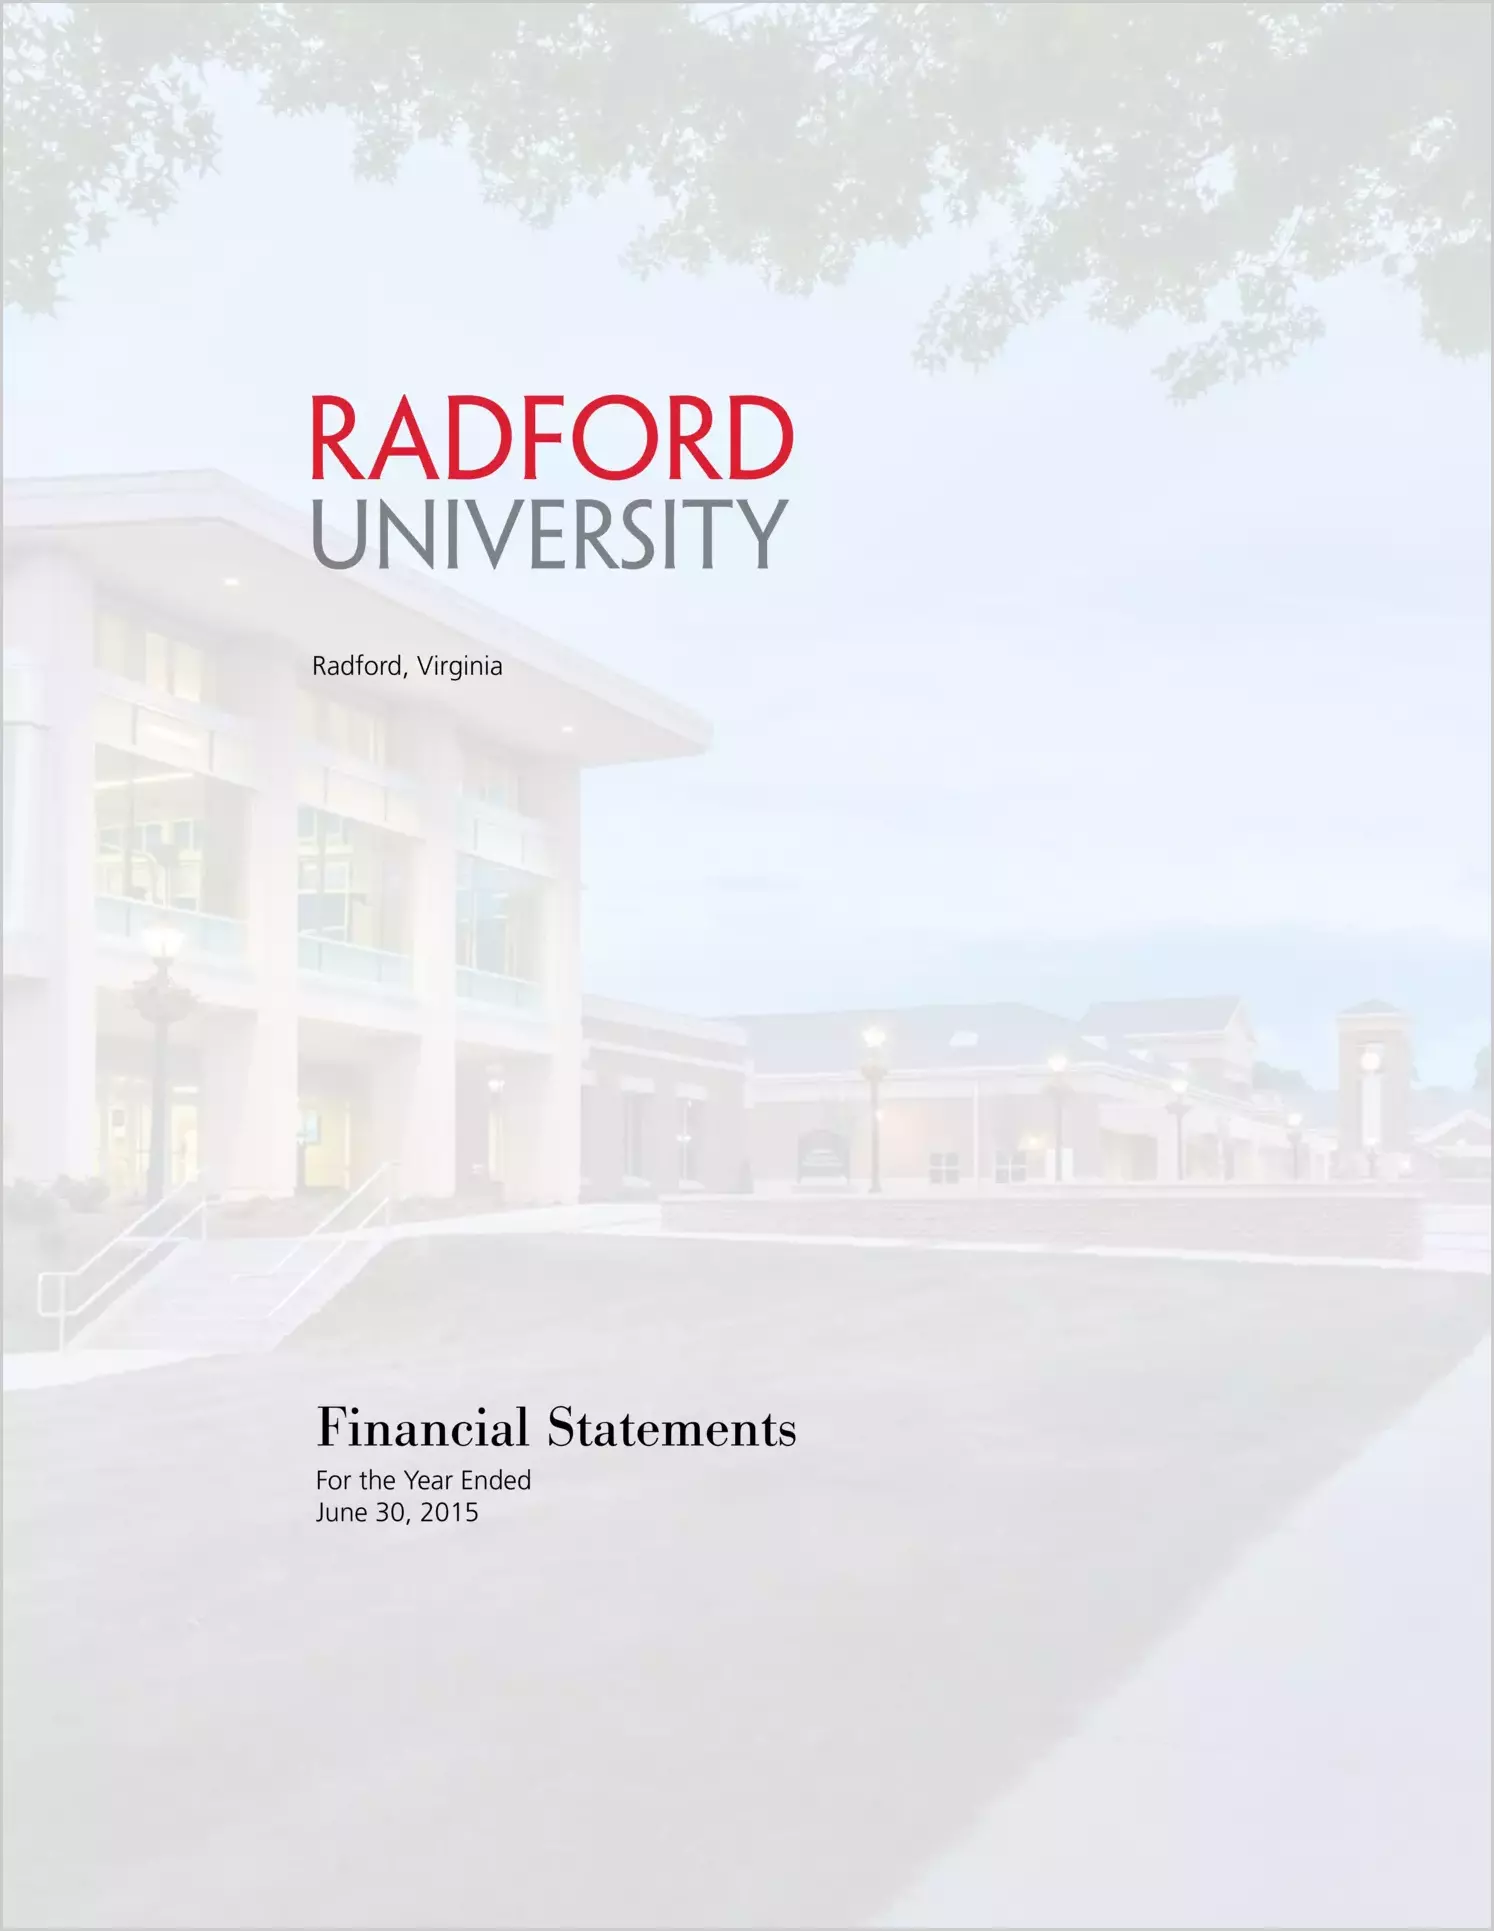 Radford University Financial Statements for the year ended June 30, 2015